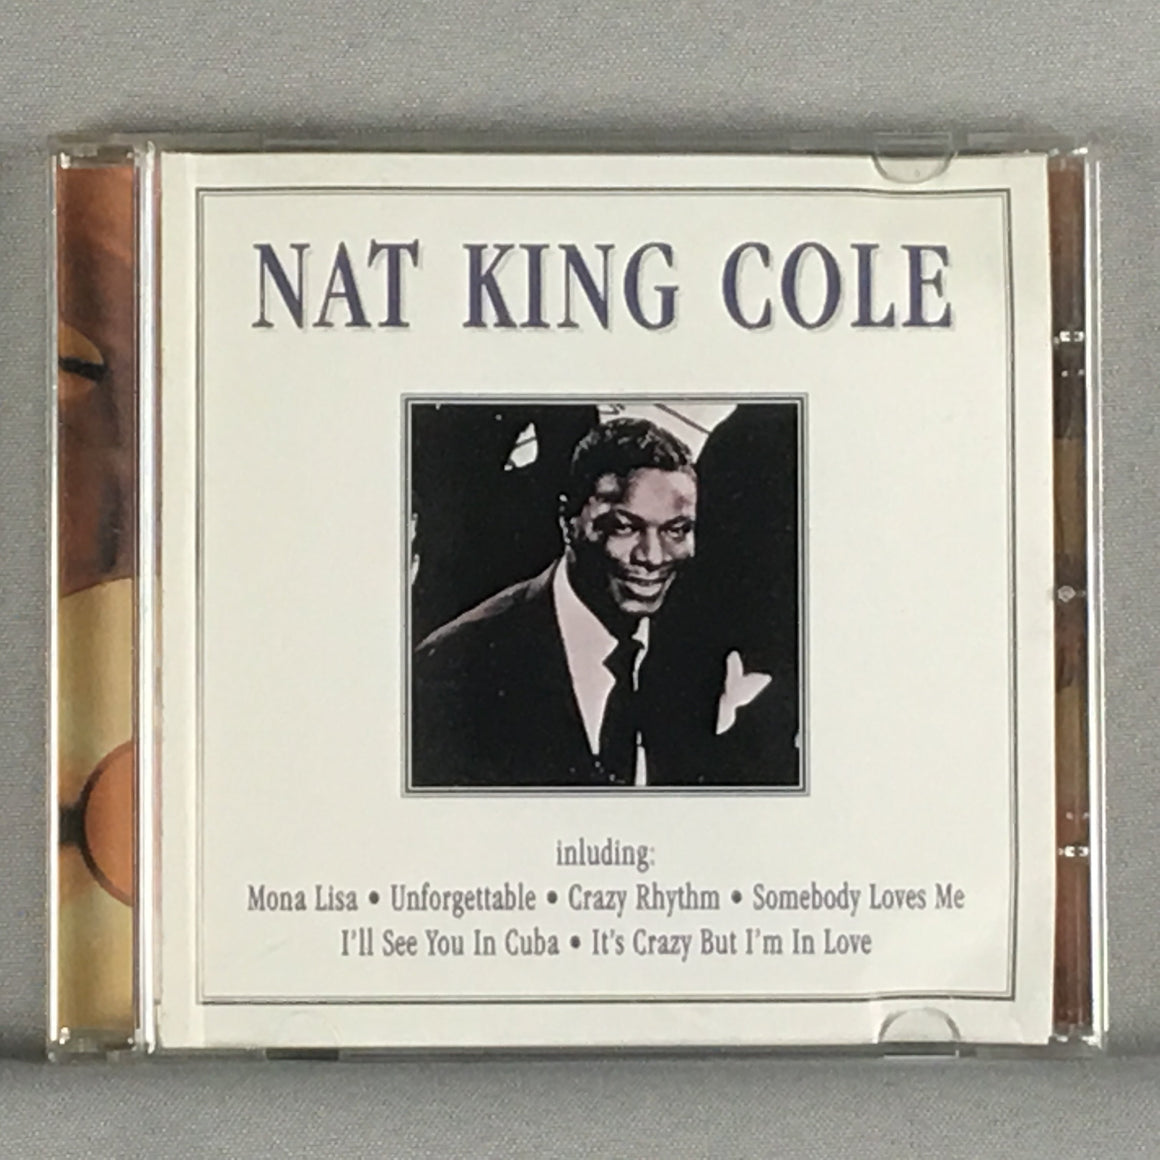 Nat King Cole Unforgettable - Import (javelin) Used CD VG+\VG+